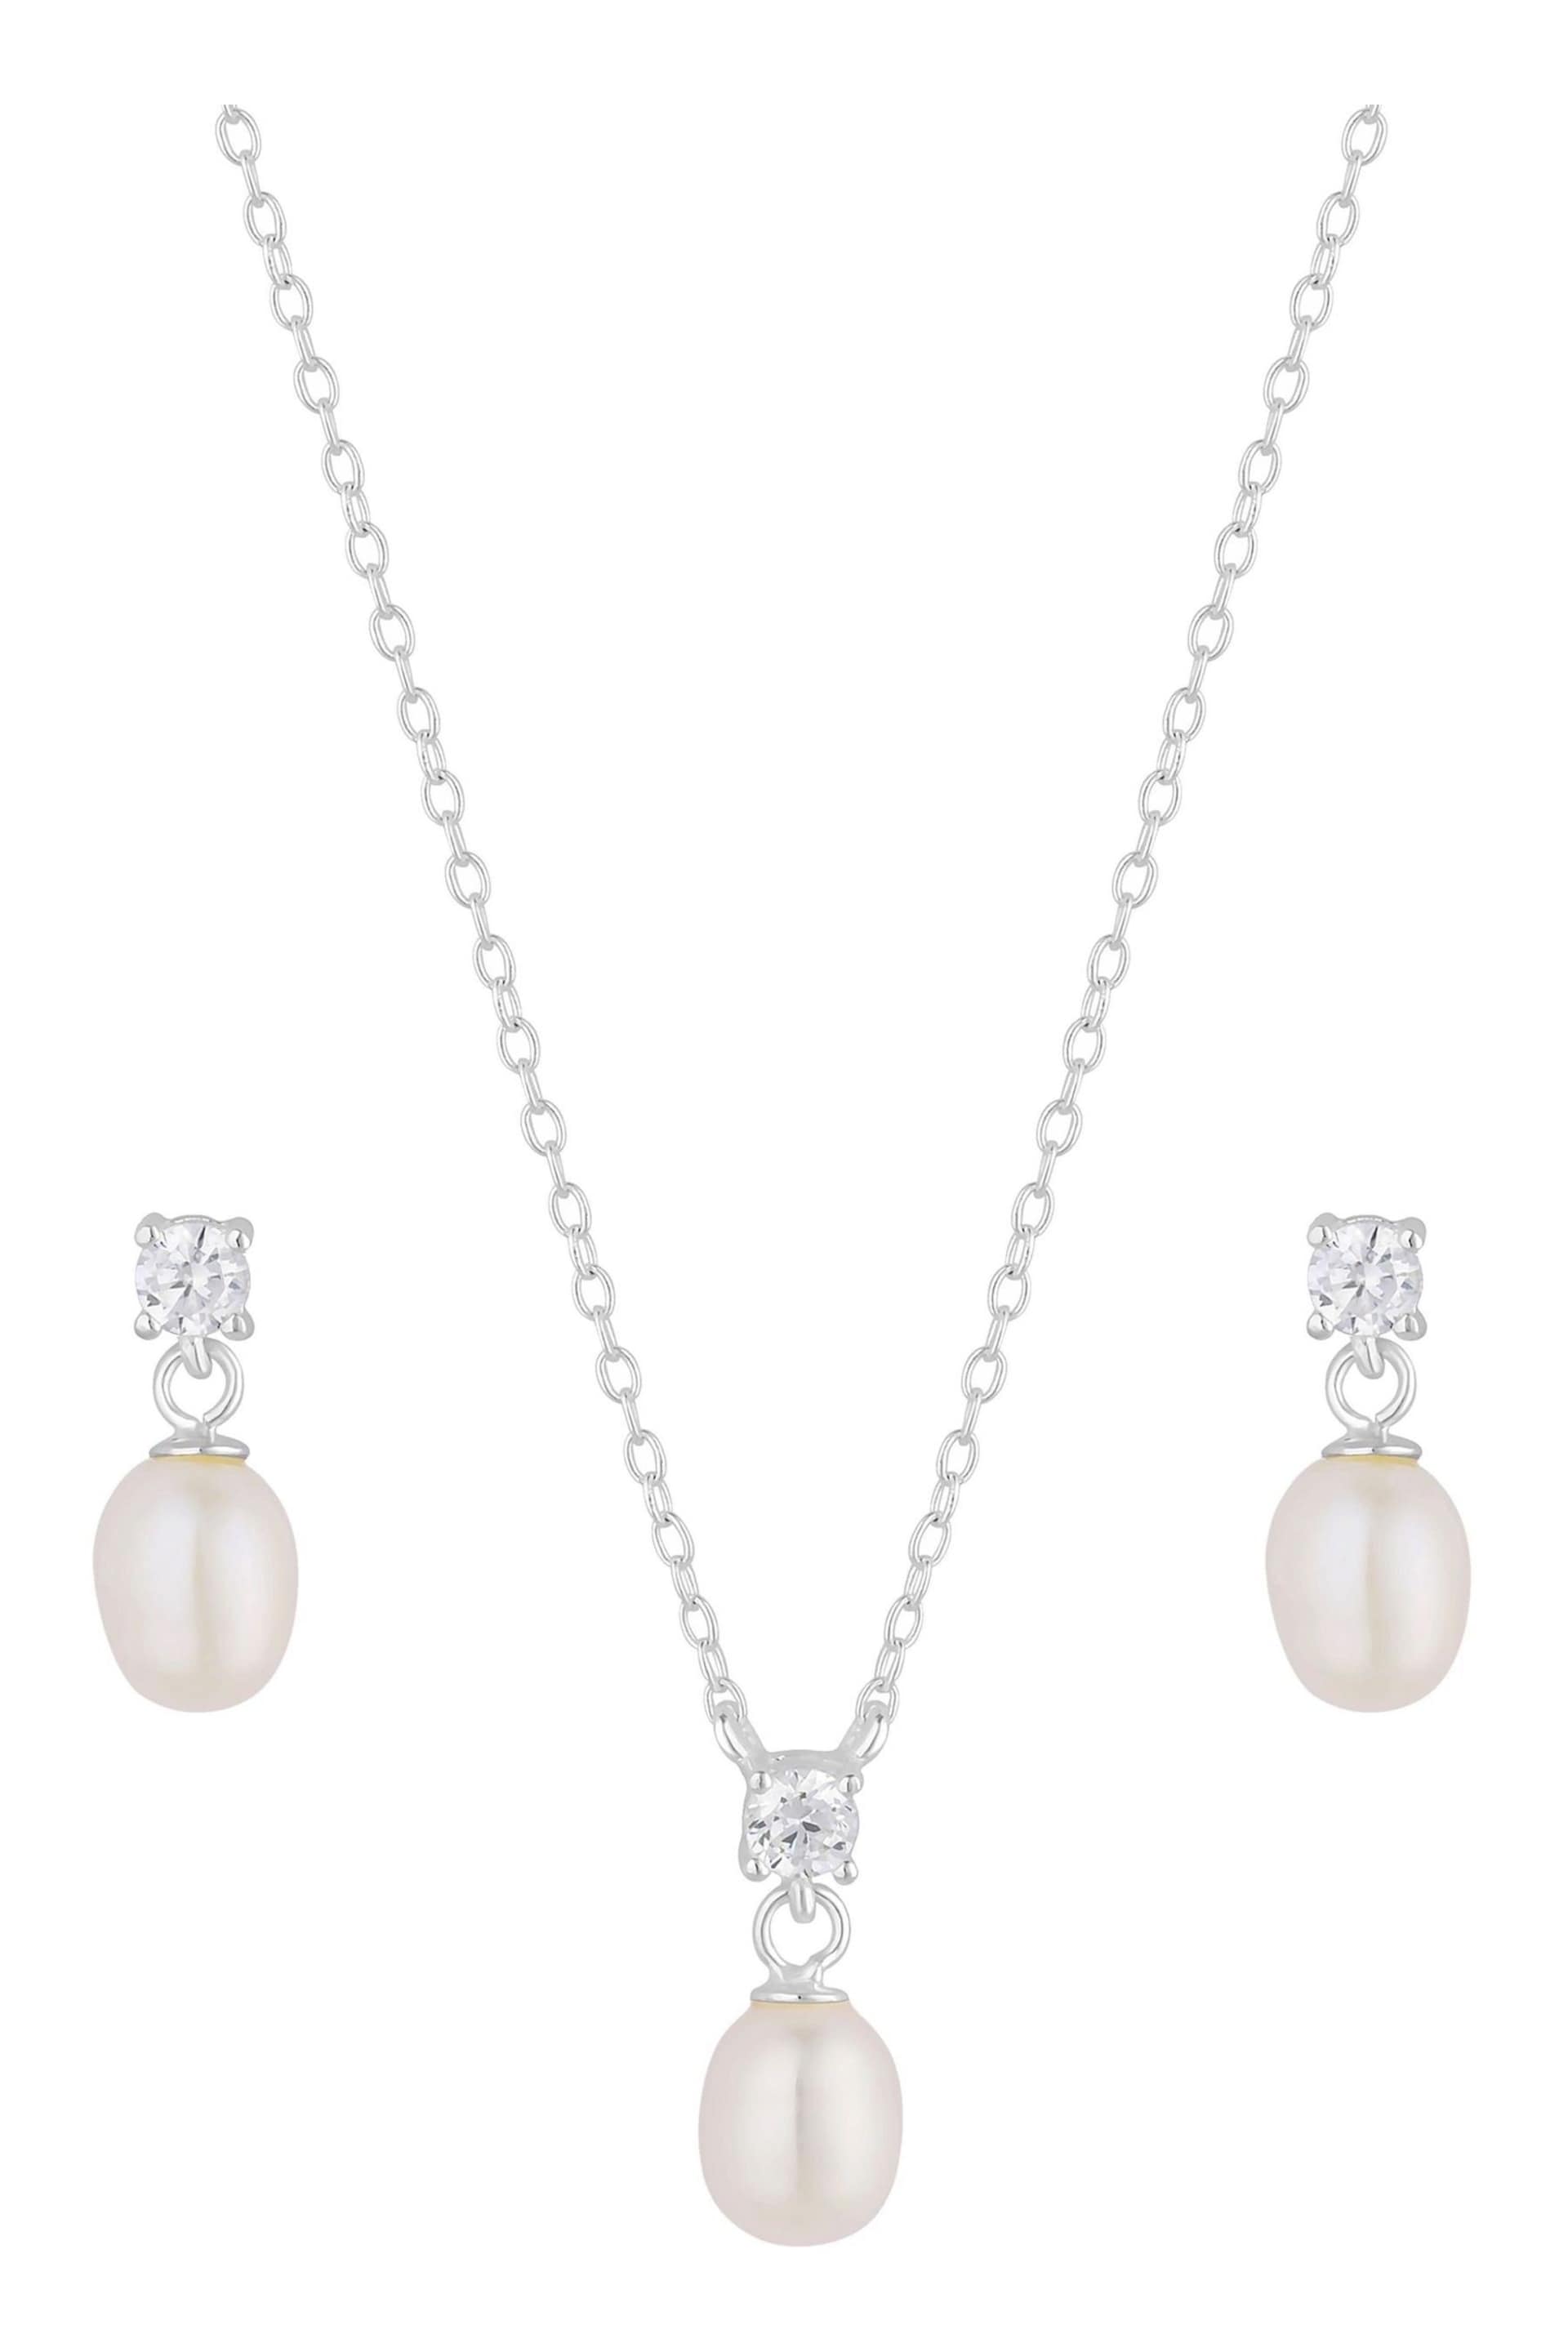 Simply Silver Silver Freshwater Pearl And Cubic Zirconia Set - Image 2 of 4